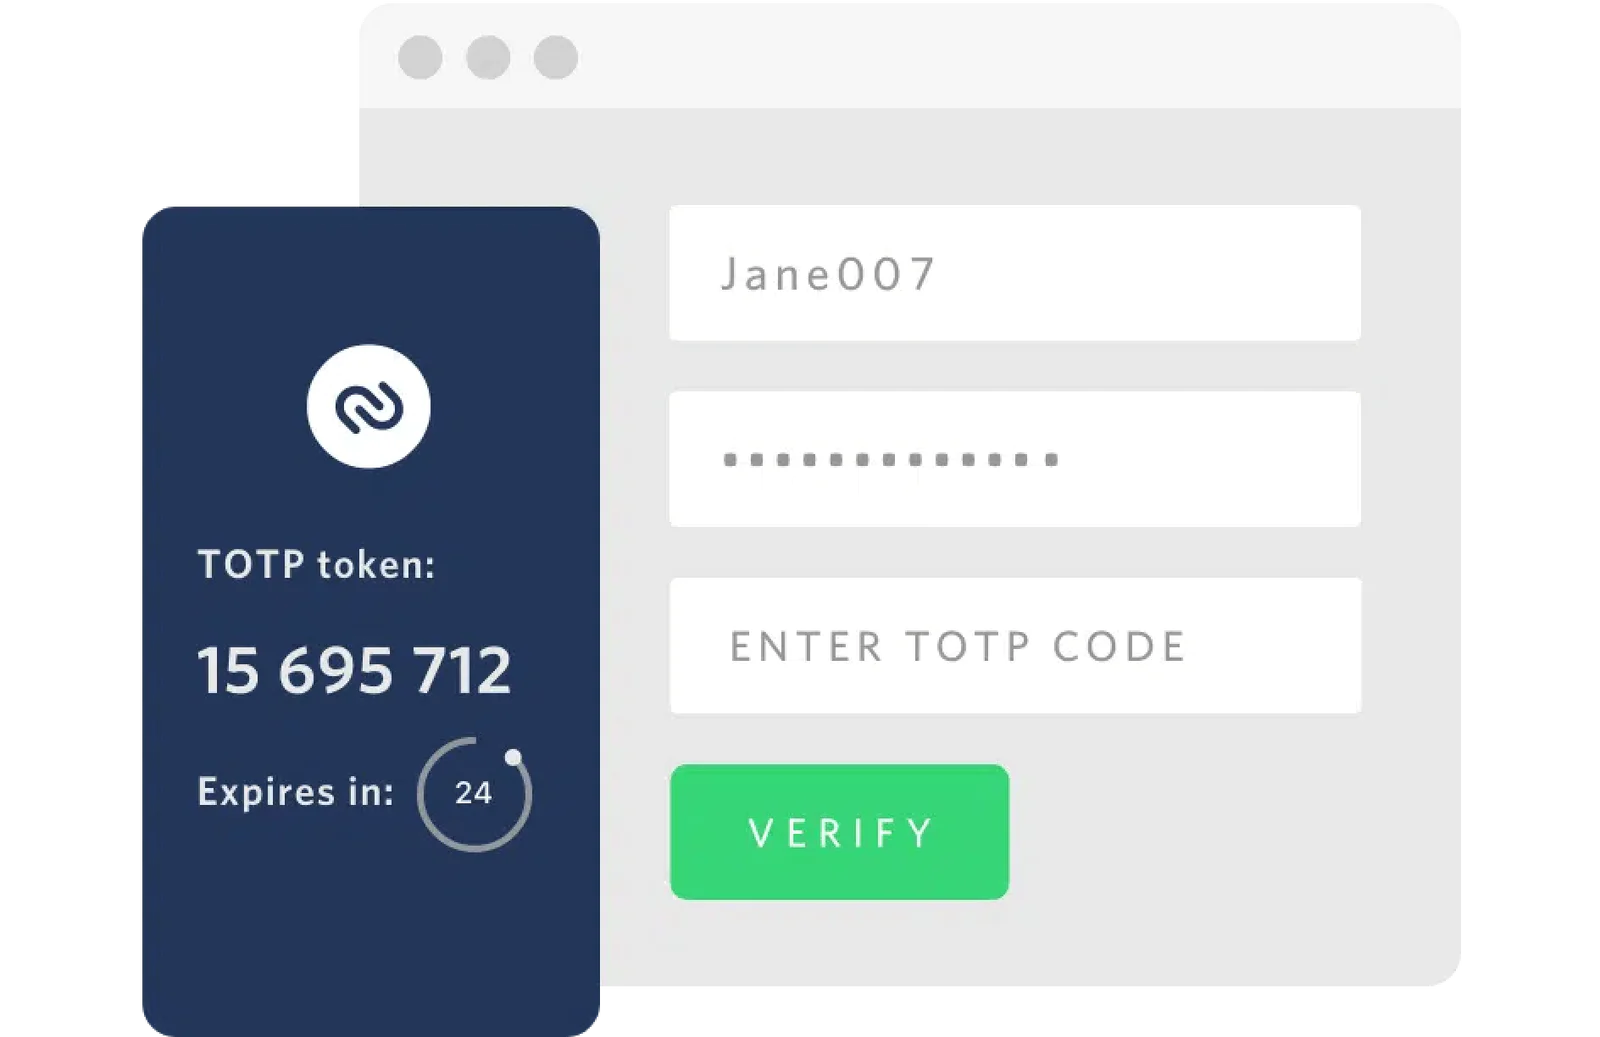 Authy security tokens